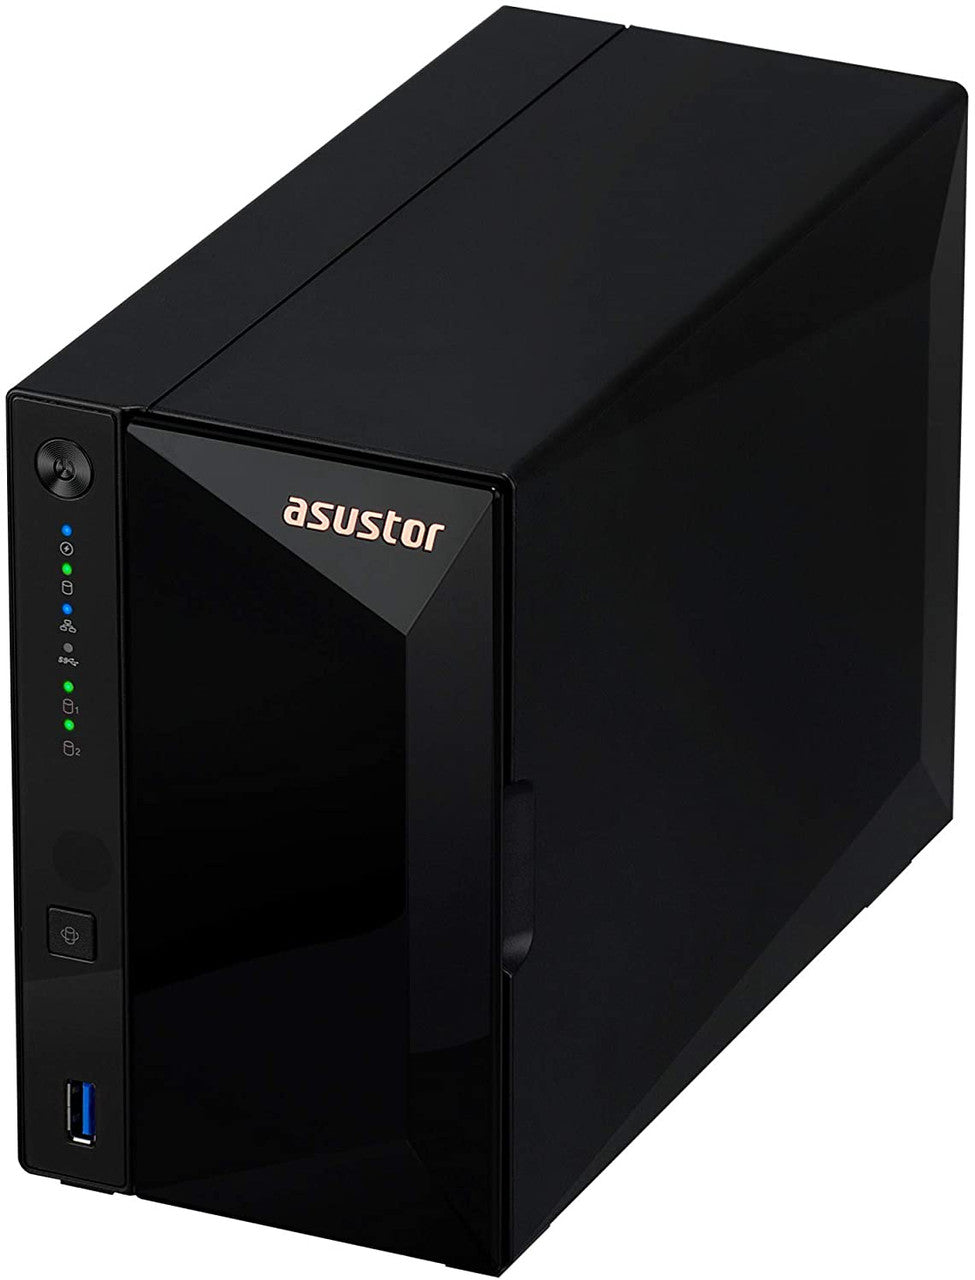 Asustor AS3302T 2-Bay Drivestor 2 PRO NAS with 2GB RAM and 12TB (2x6TB) Western Digital RED Plus Drives Fully Assembled and Tested